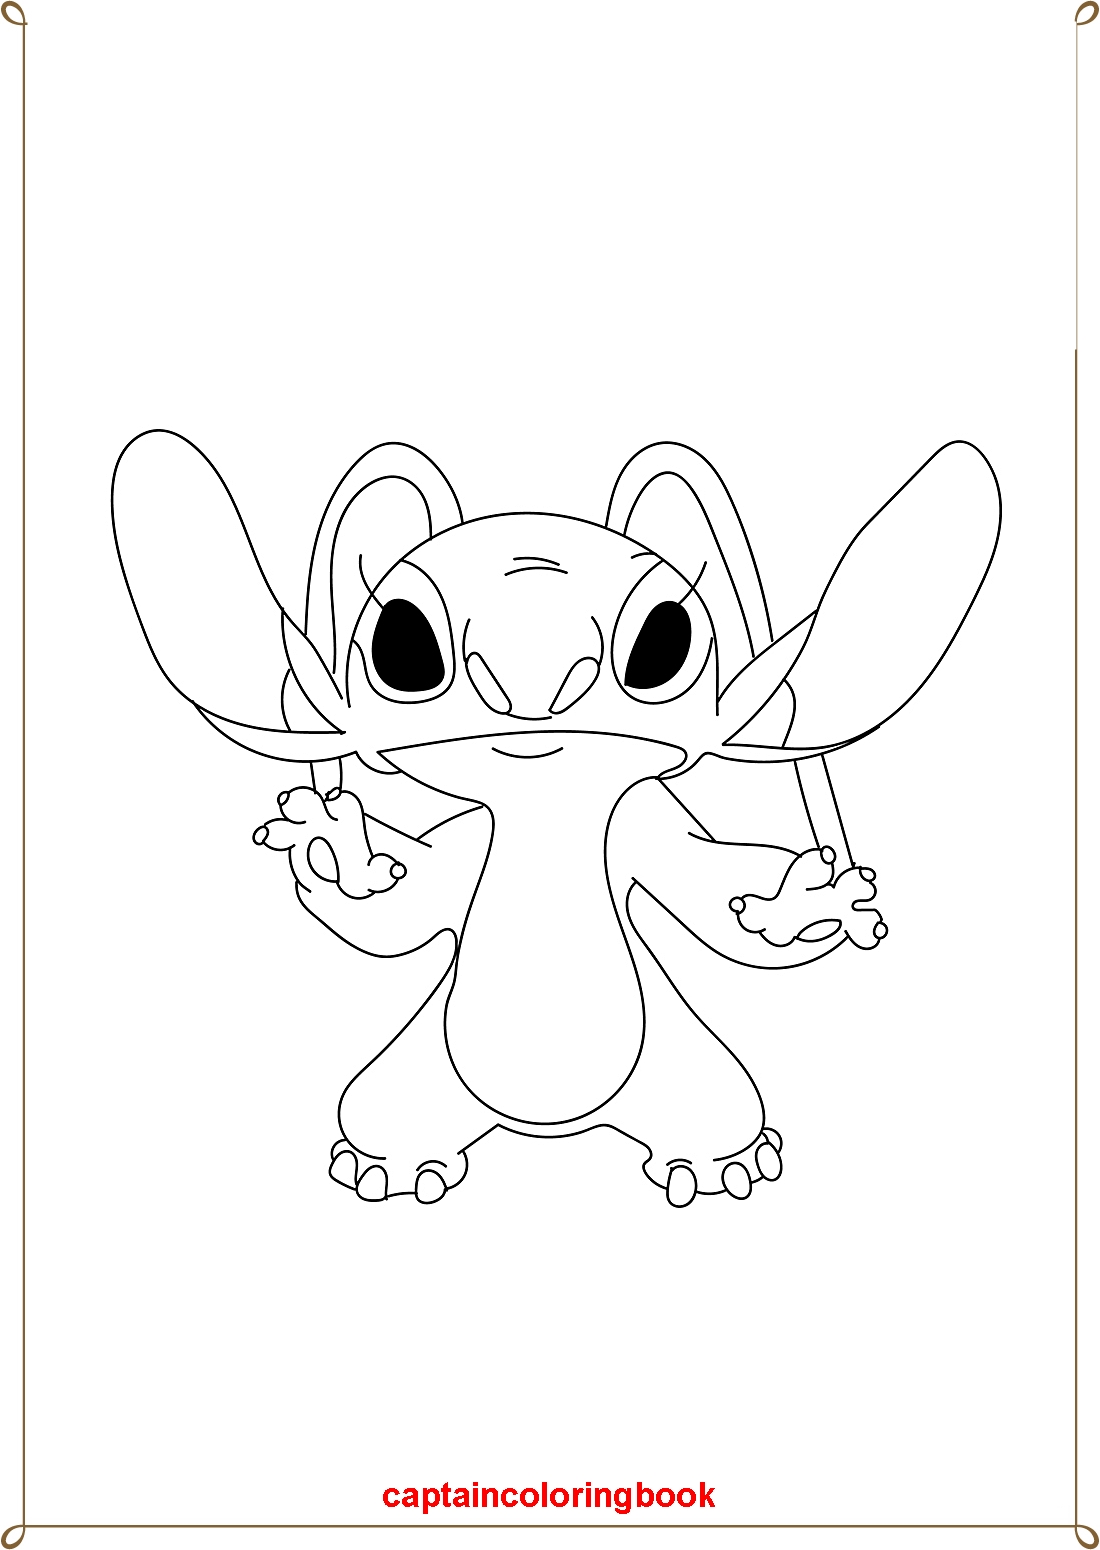 Angel Adorable Stitch Coloring Pages   Stitch & Angel hugging   Lilo ...